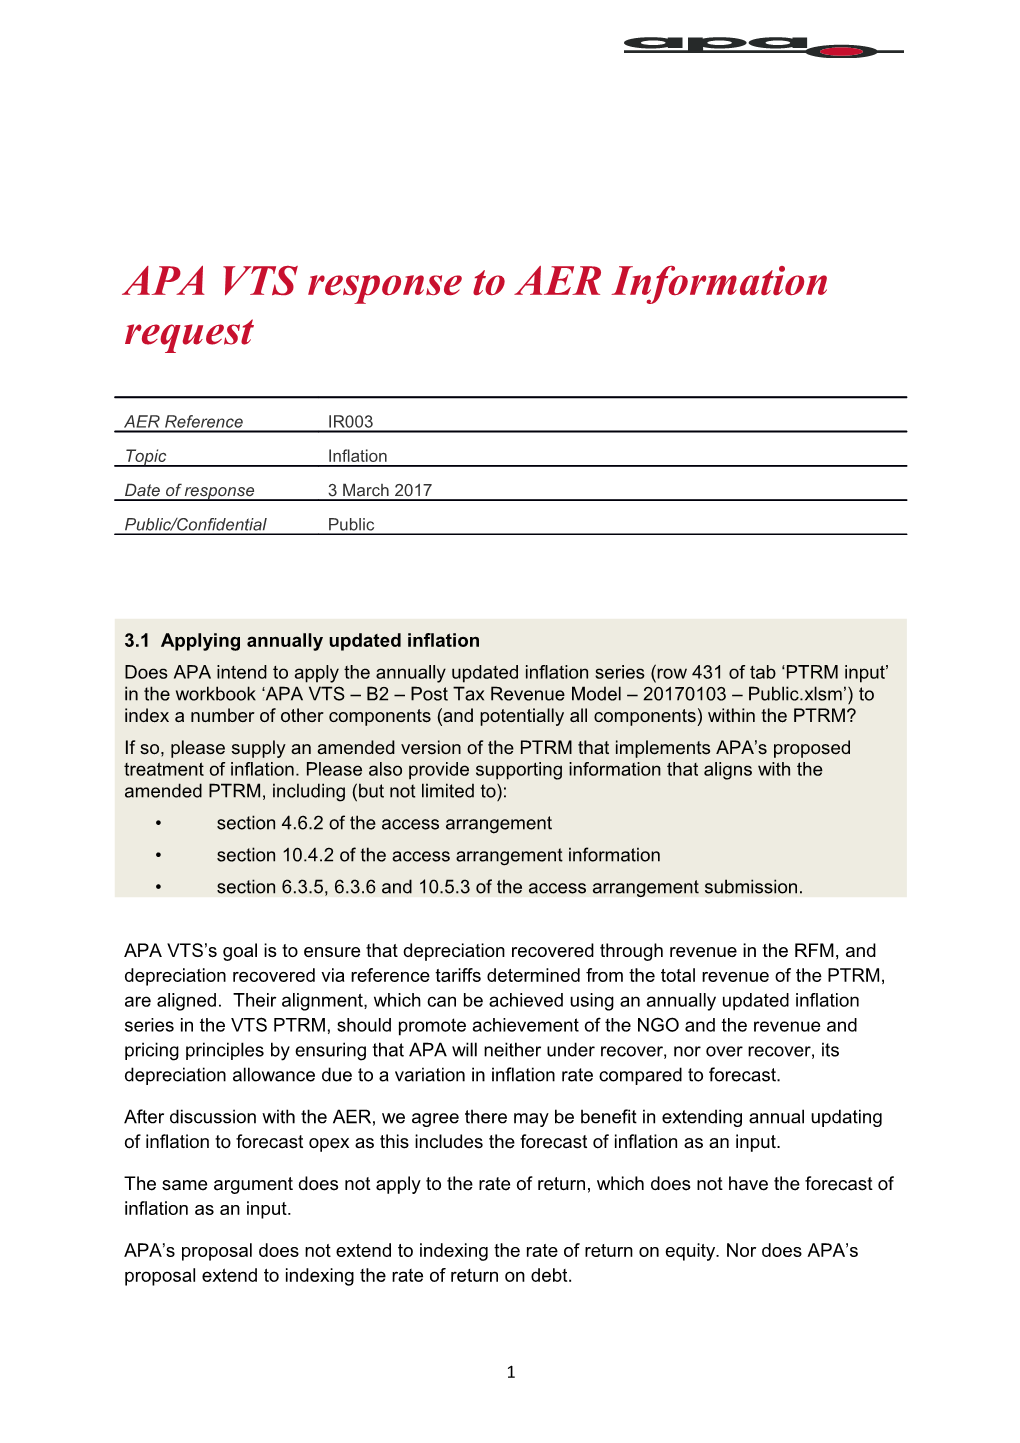 APA VTS Response to AER Information Request